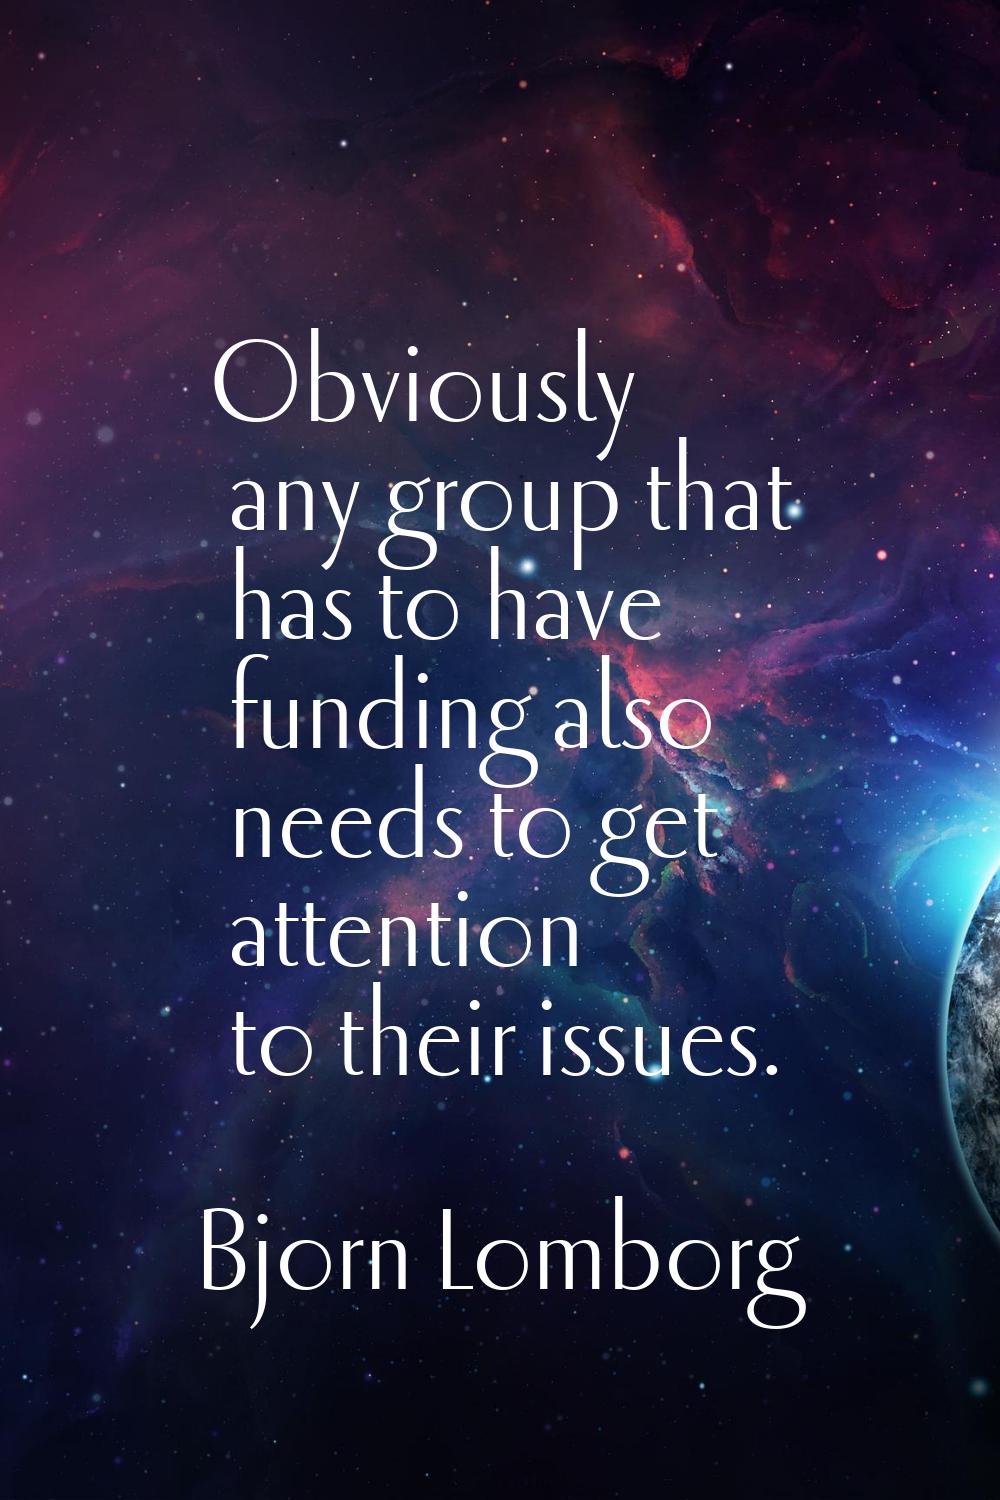 Obviously any group that has to have funding also needs to get attention to their issues.